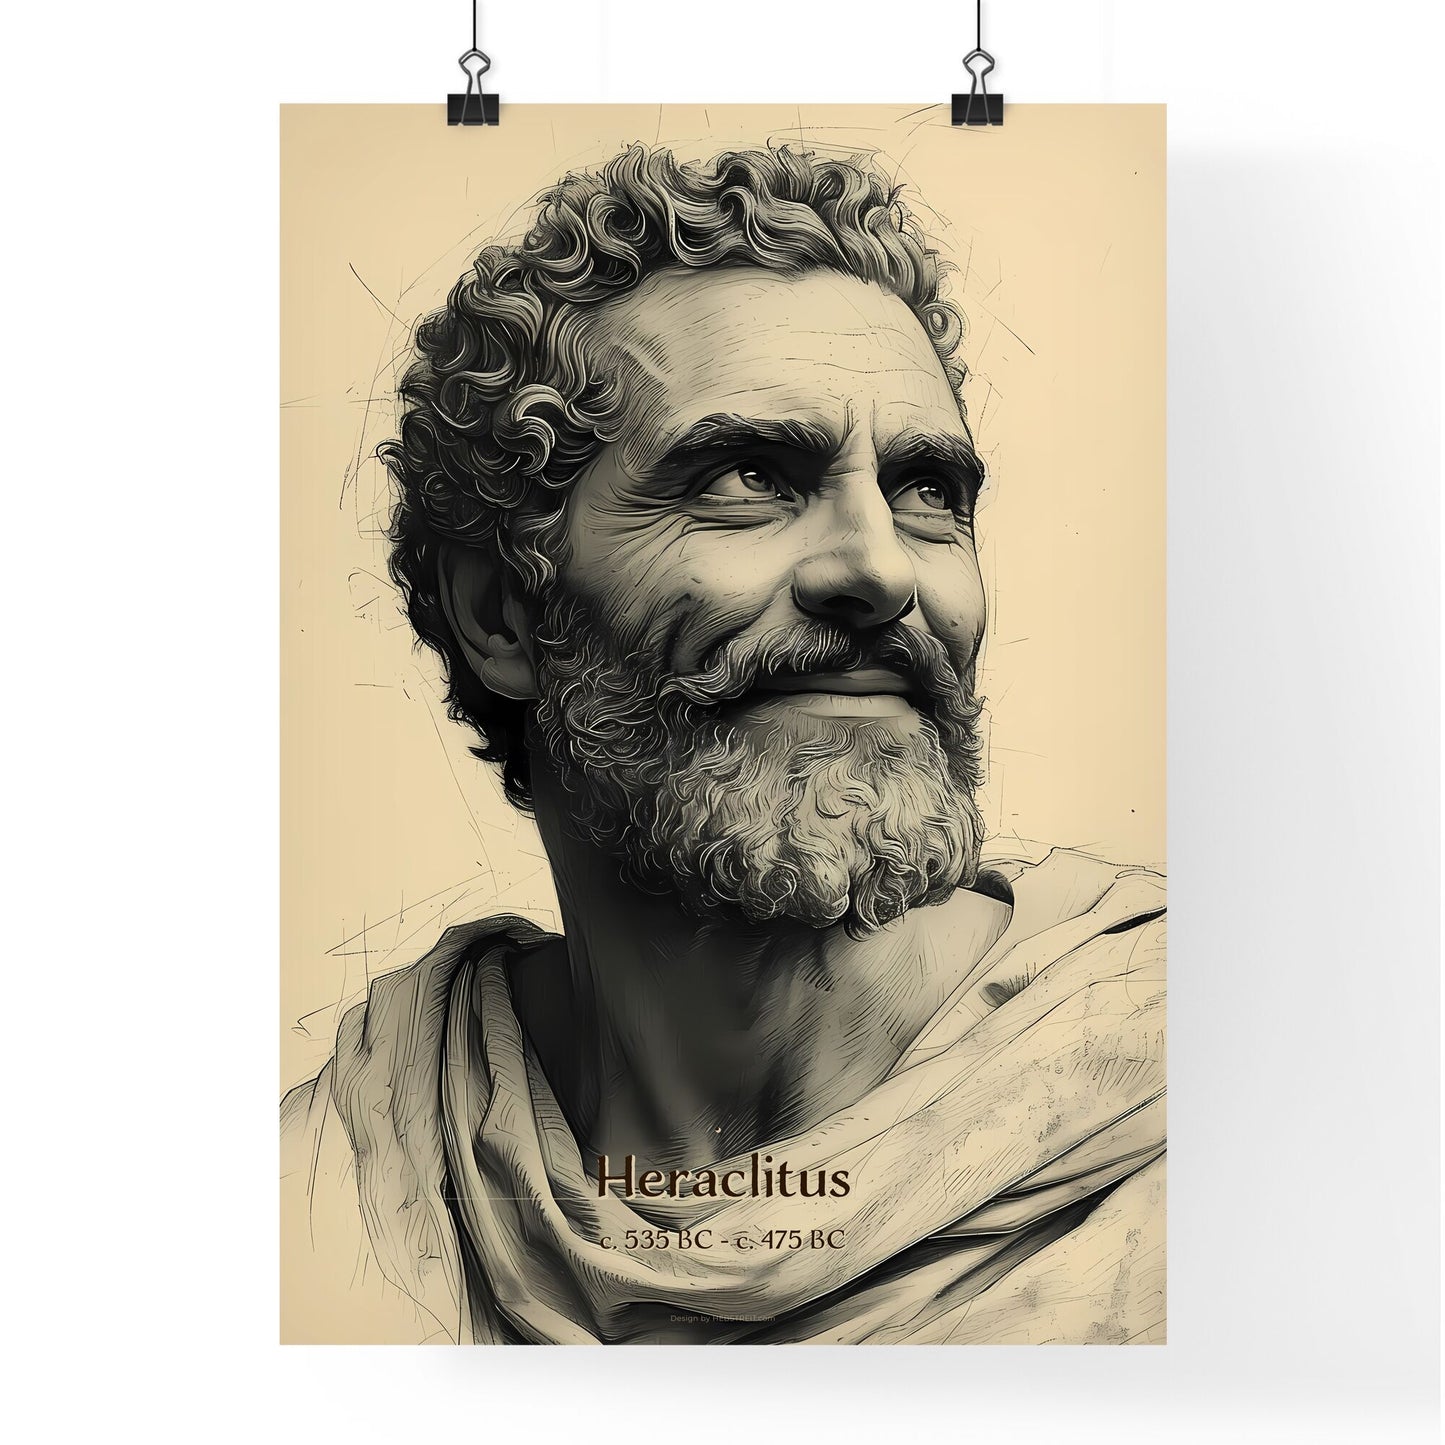 Heraclitus, c. 535 BC - c. 475 BC, A Poster of a man with a beard and mustache Default Title